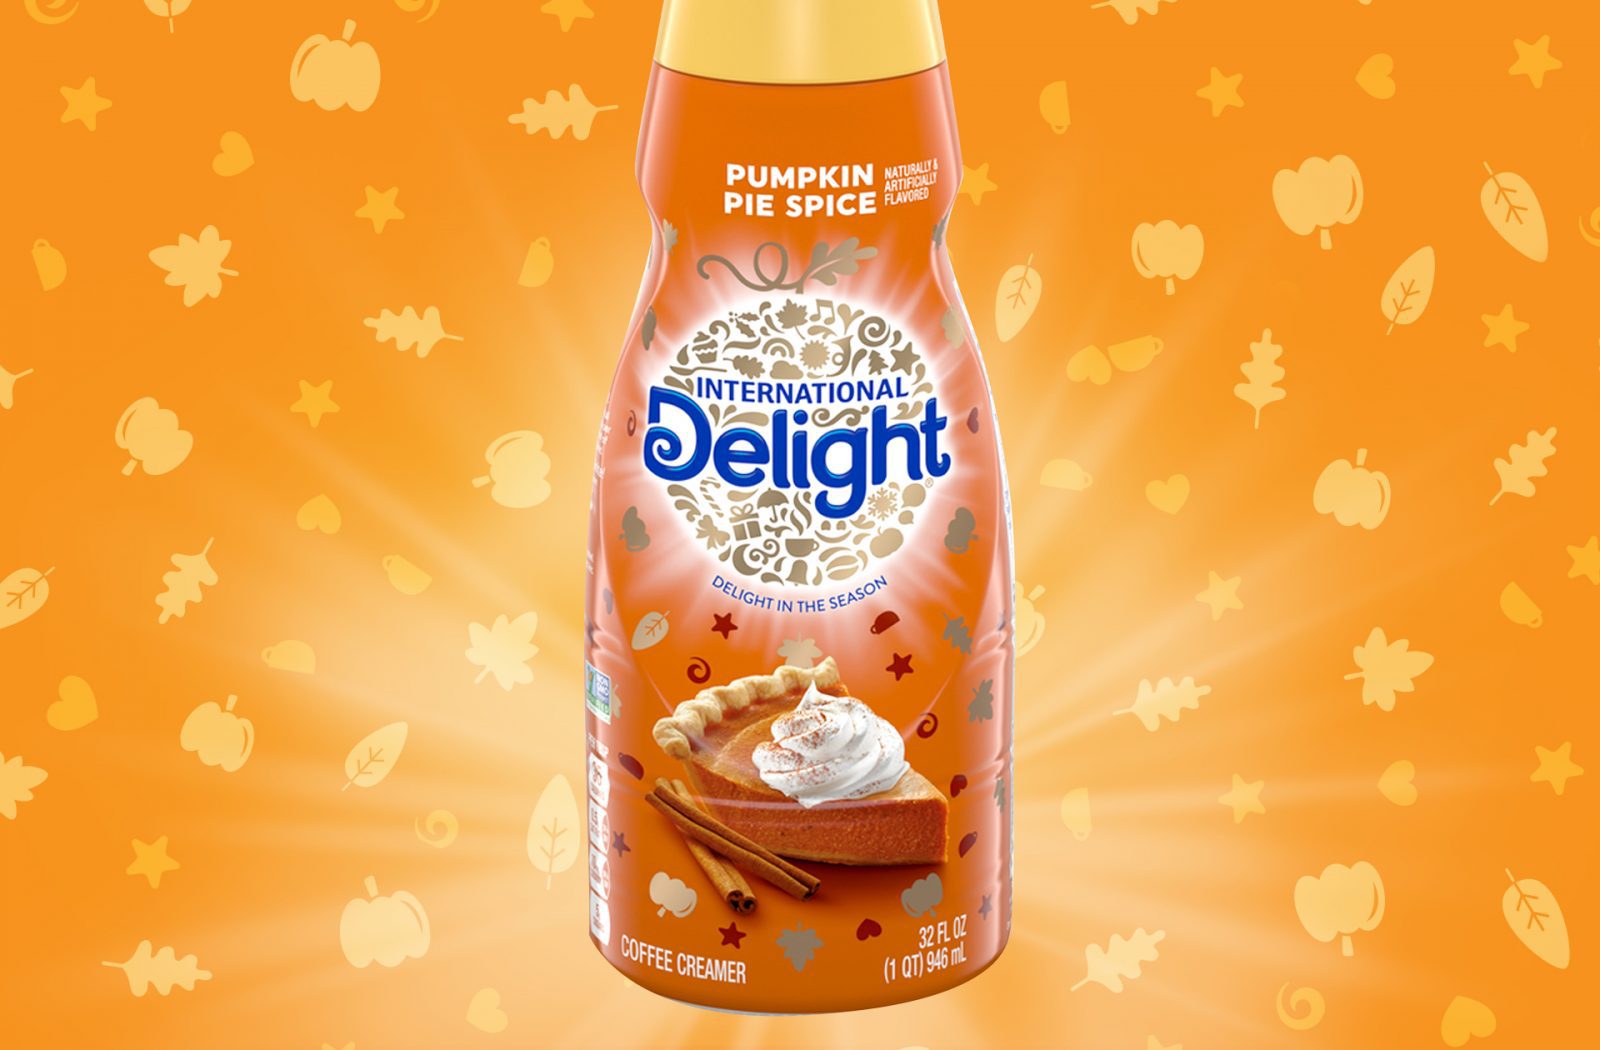 Product photography of a pumpkin spice seasonal fall variant for international delight coffee creamer, showcasing brand identity design services for consumer packaged goods.